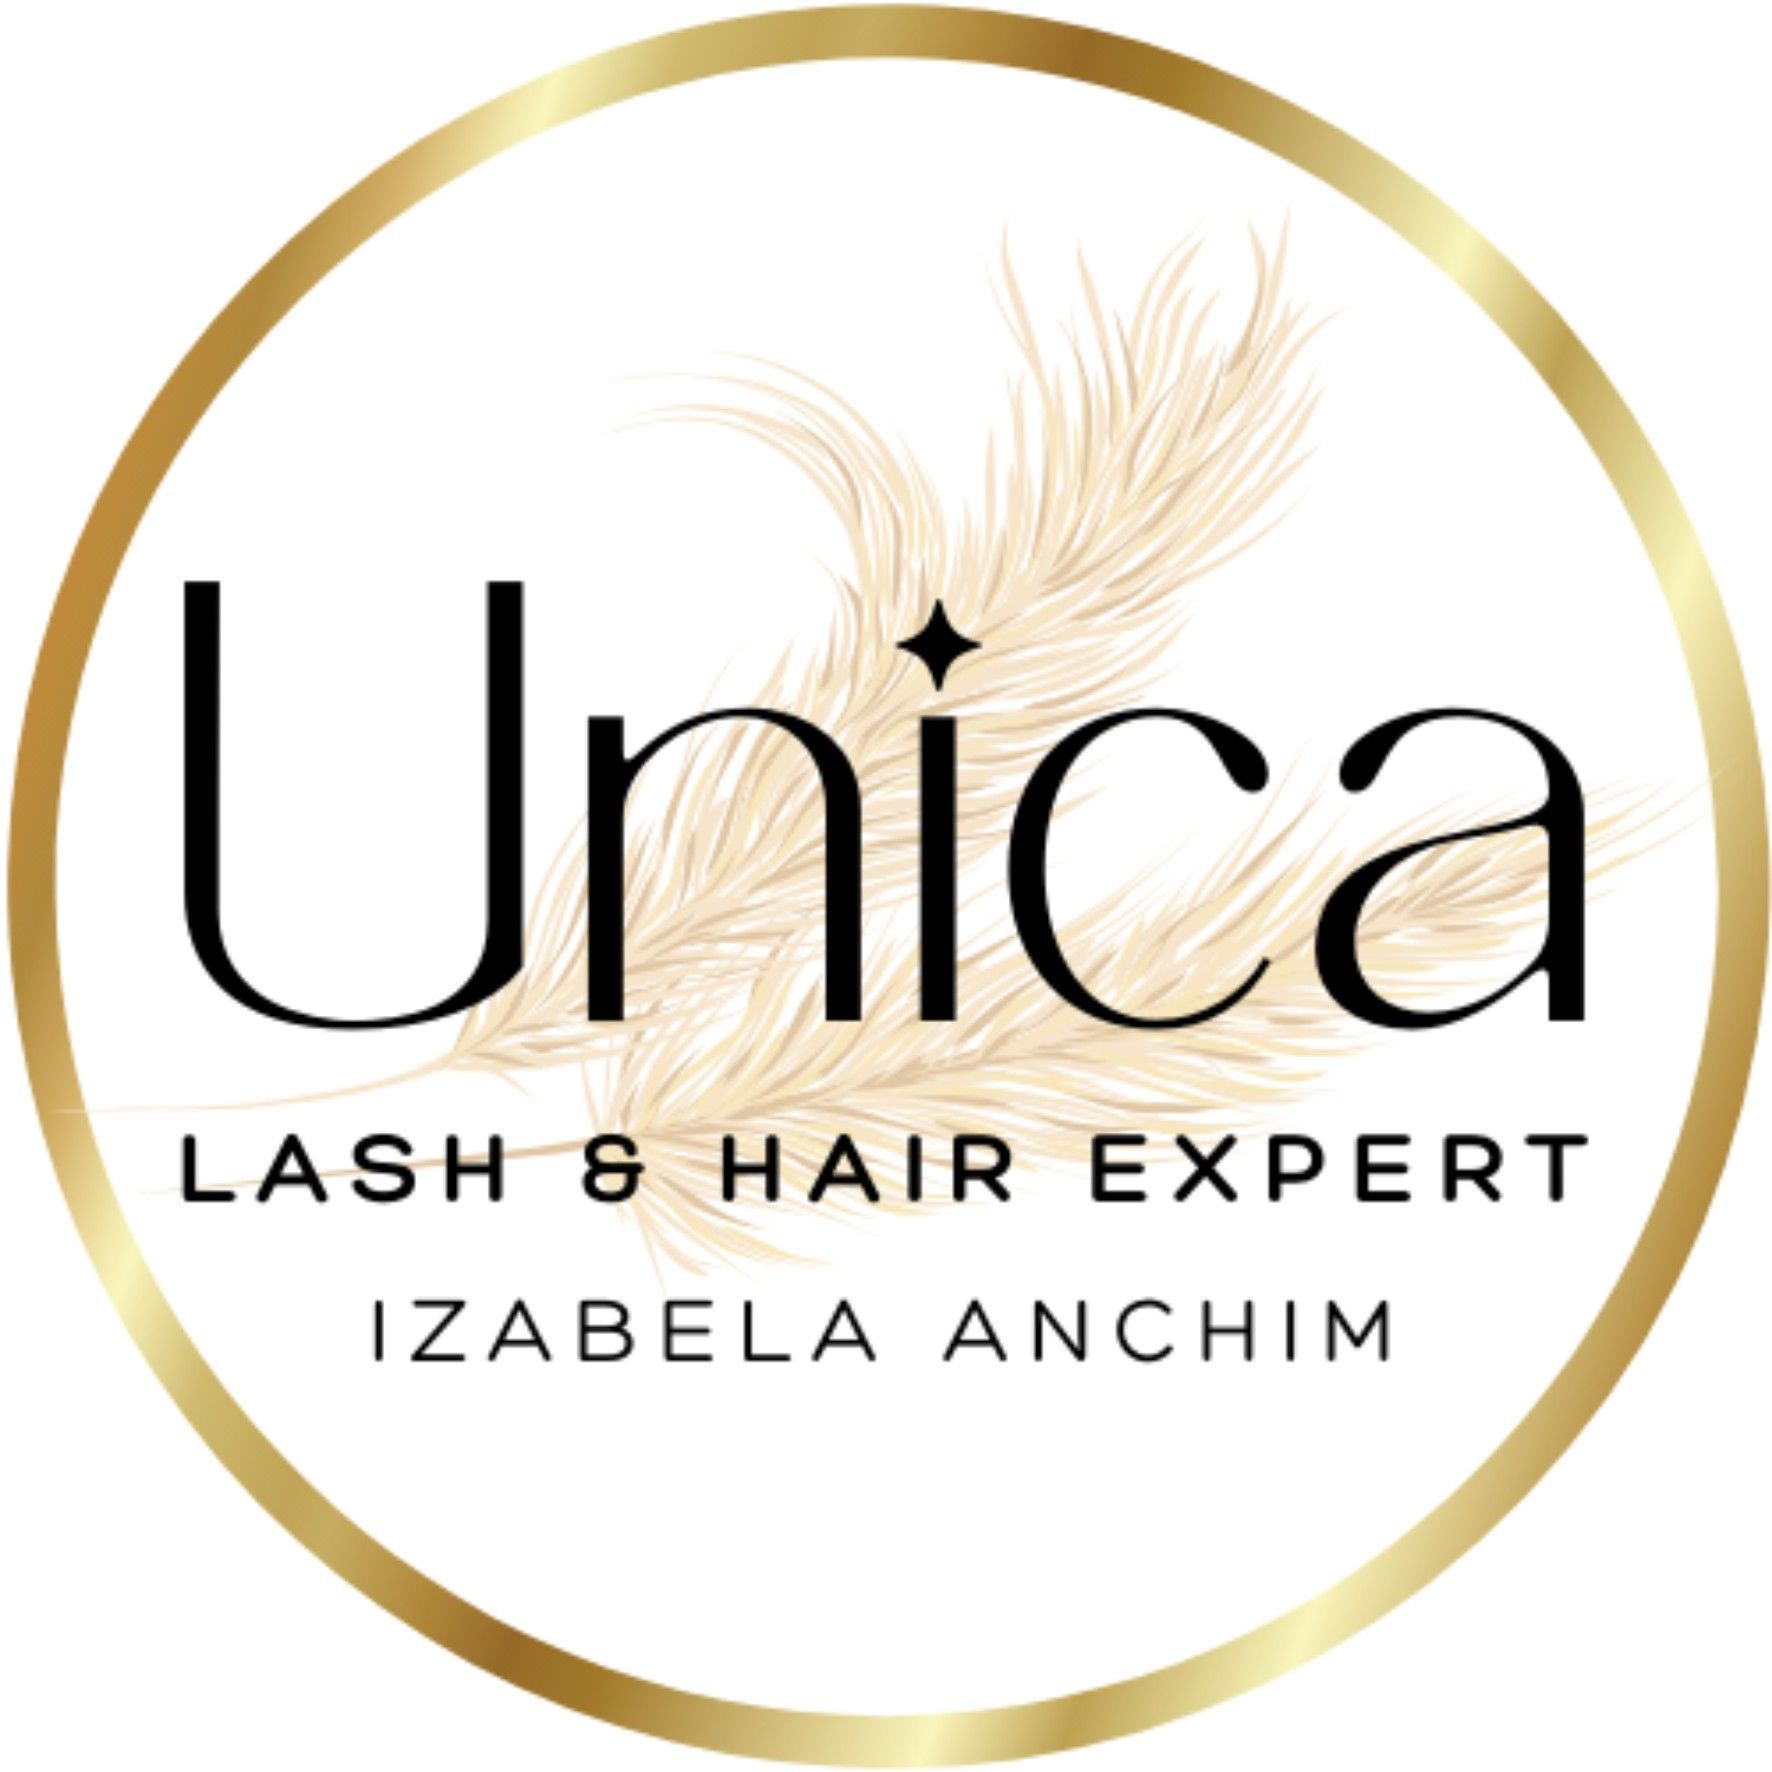 Unica Lash and Hair Expert - The Beauty Art